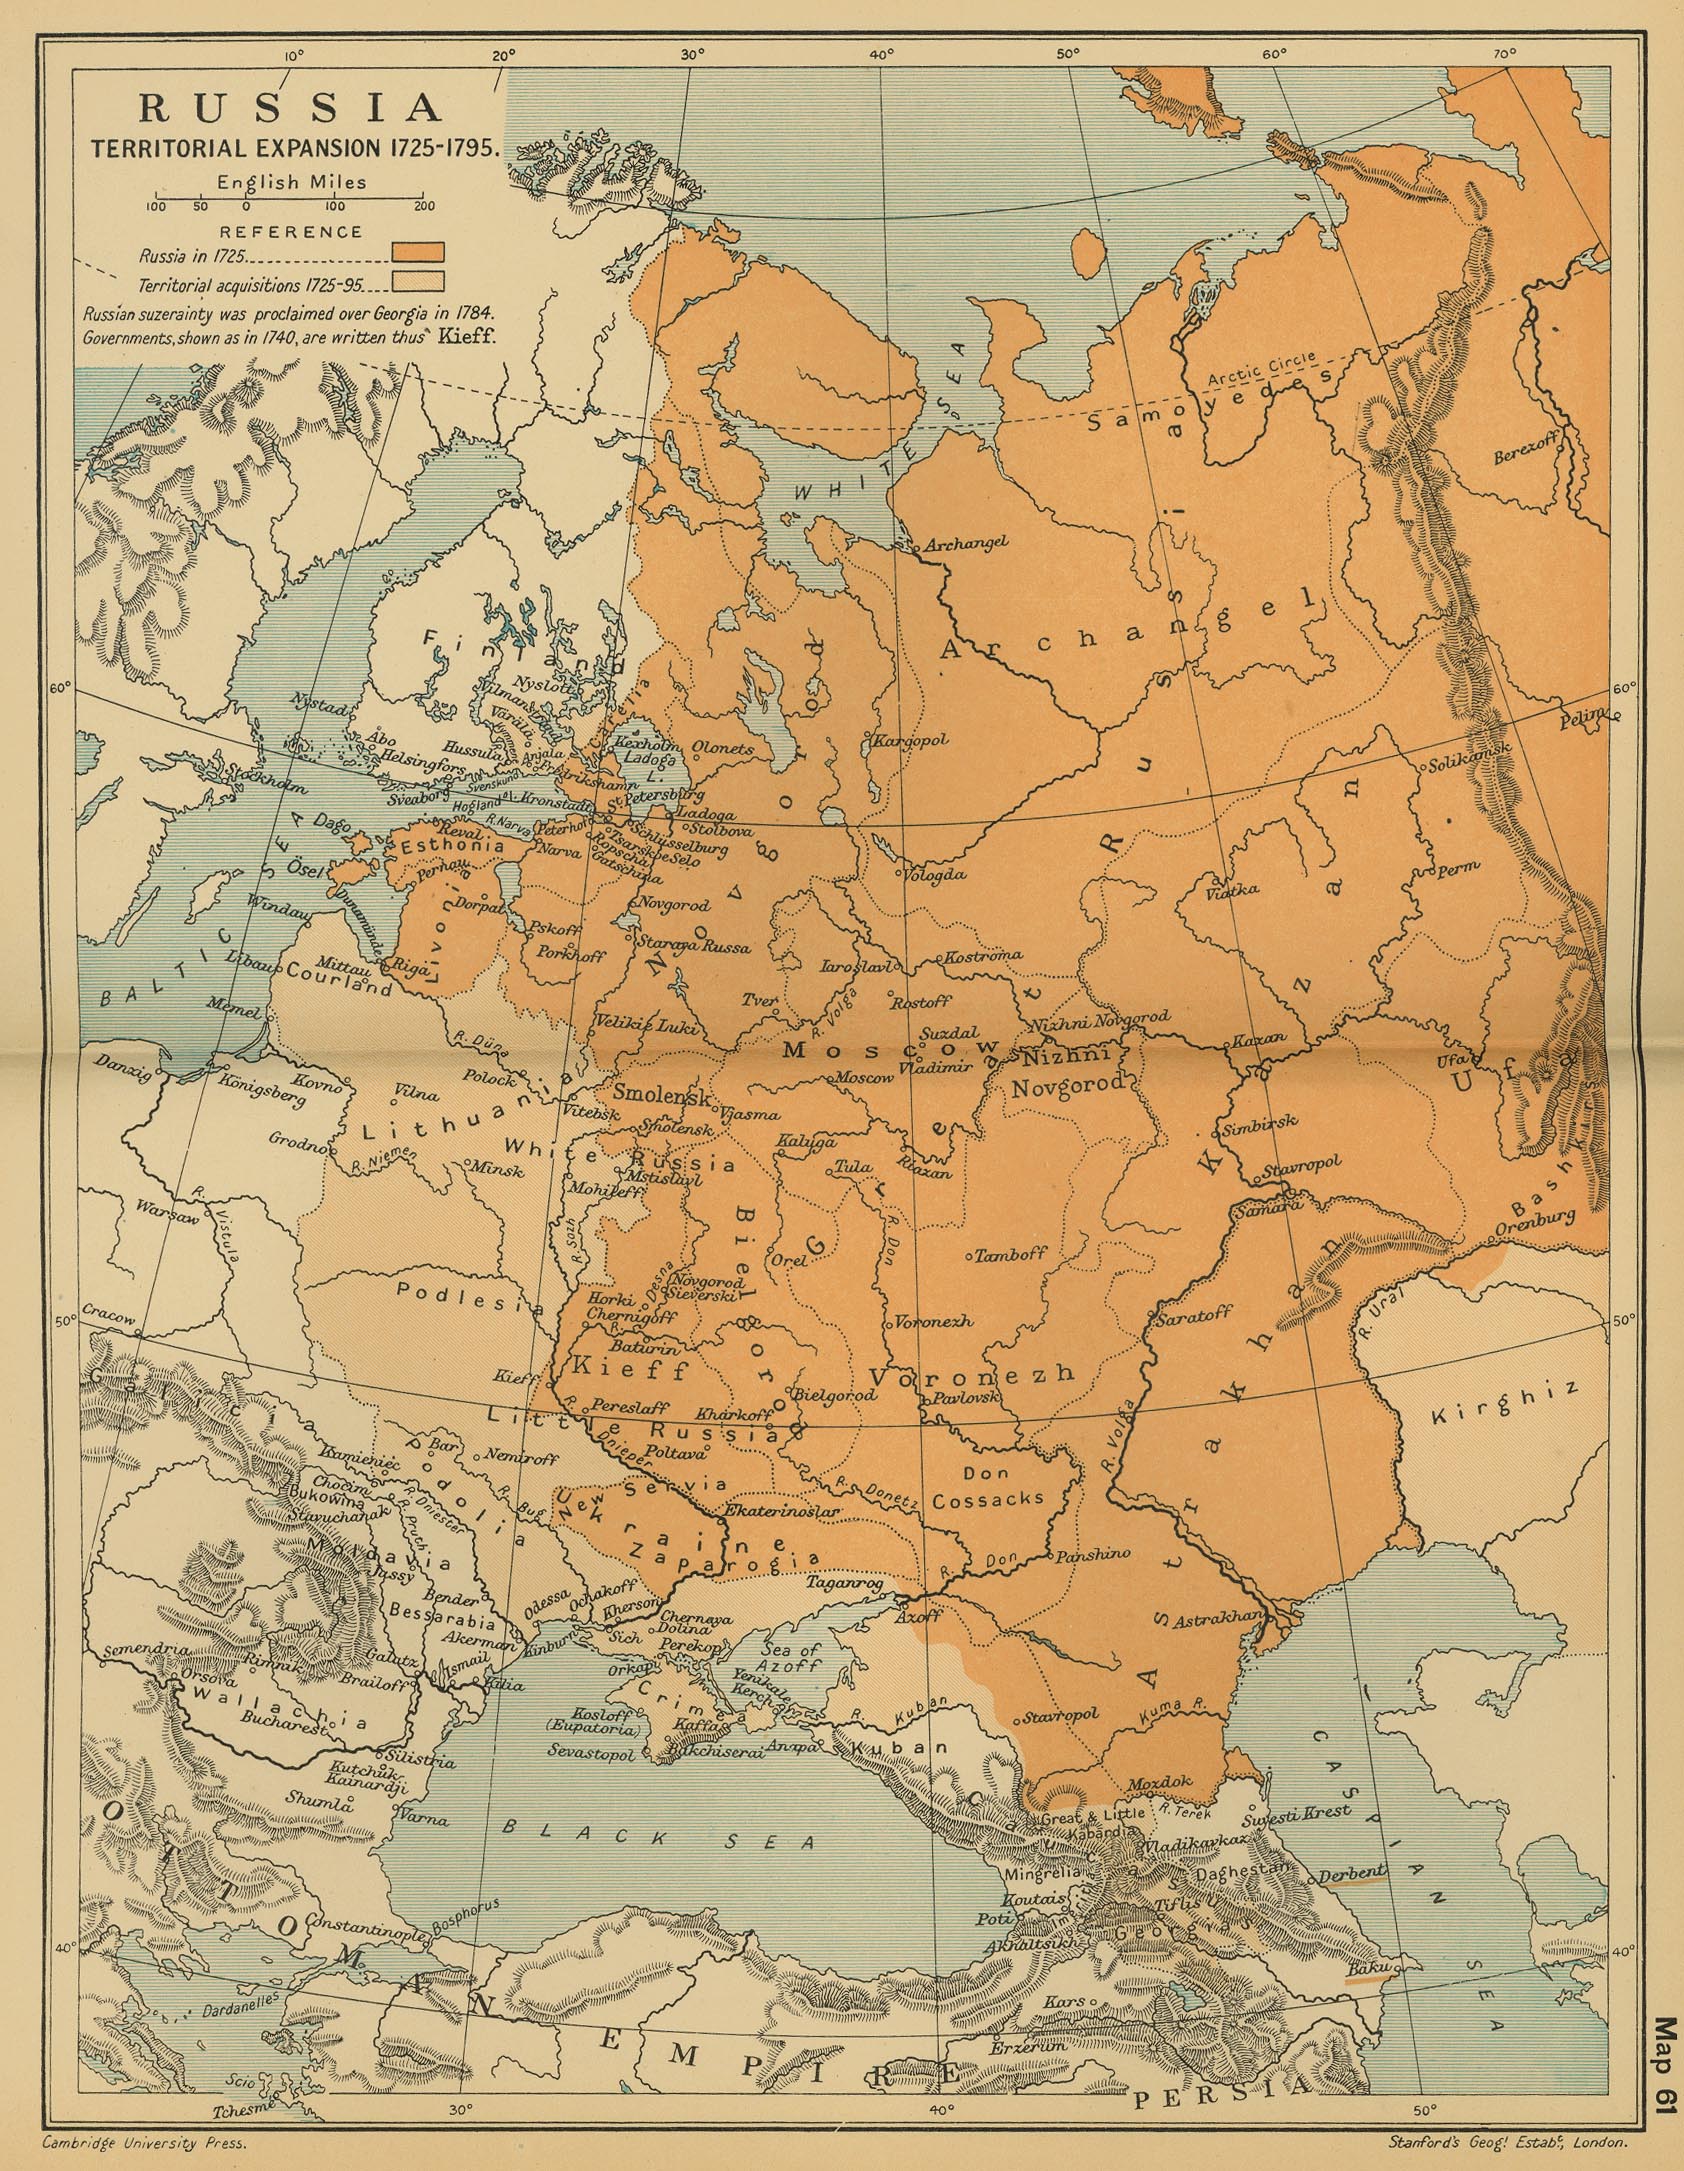 Map of Russia 1725-1795